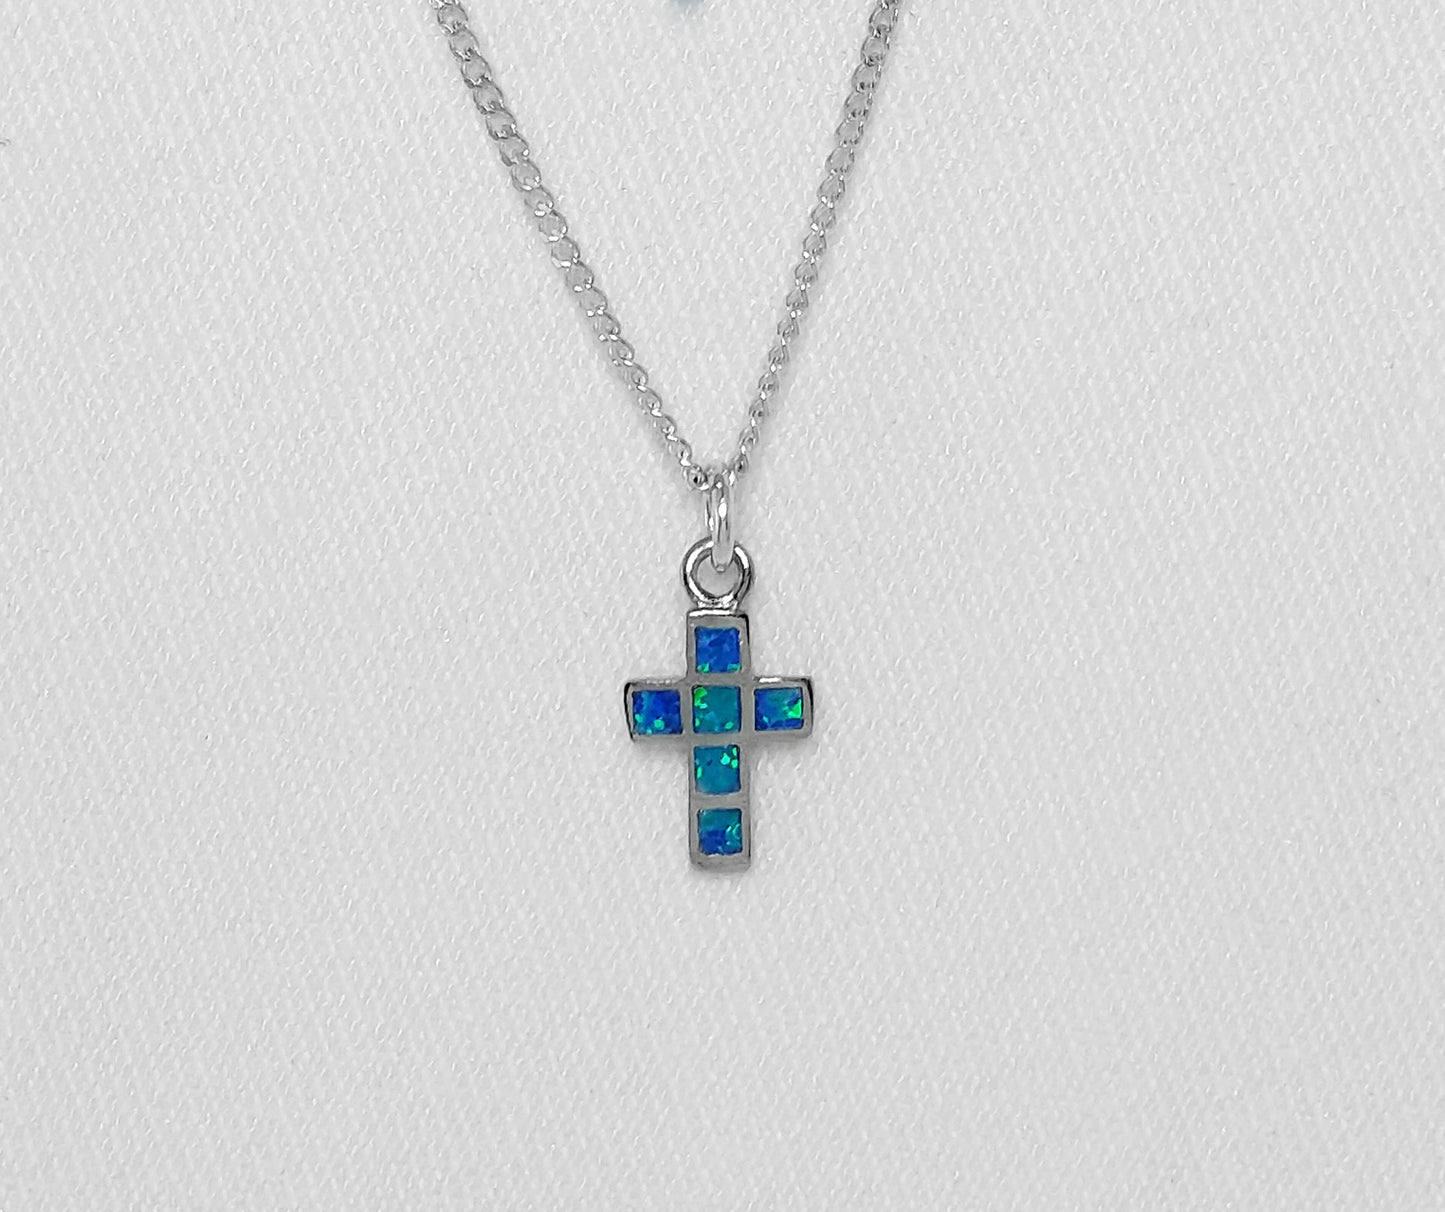 Sterling Silver Cross Pendant with Crushed Opal Inlay